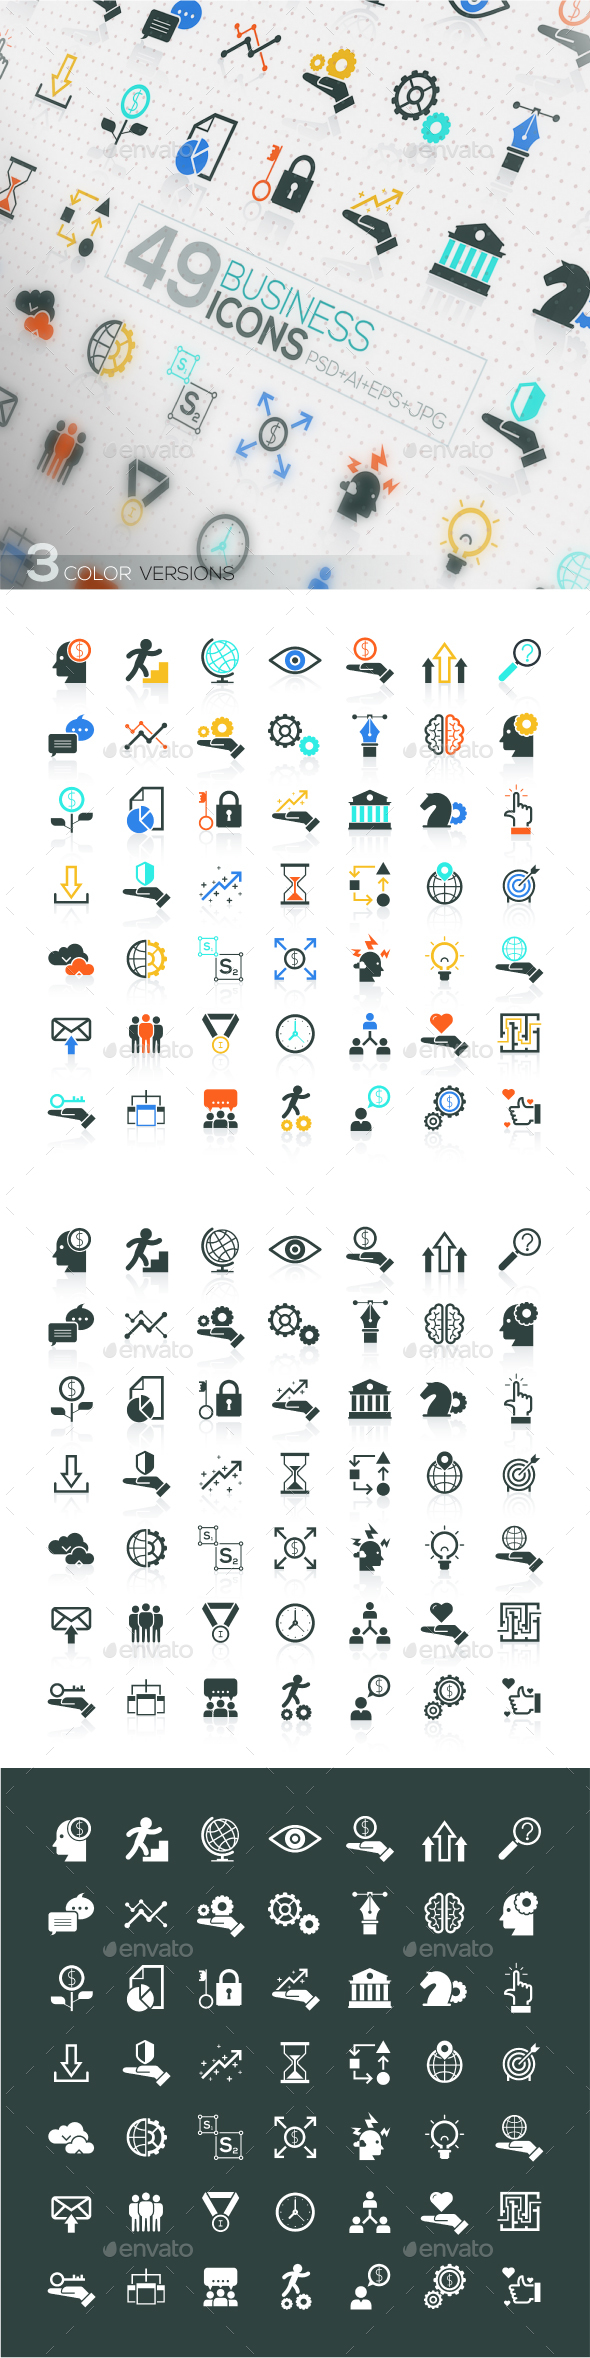 49 Modern Icons For Business And SEO